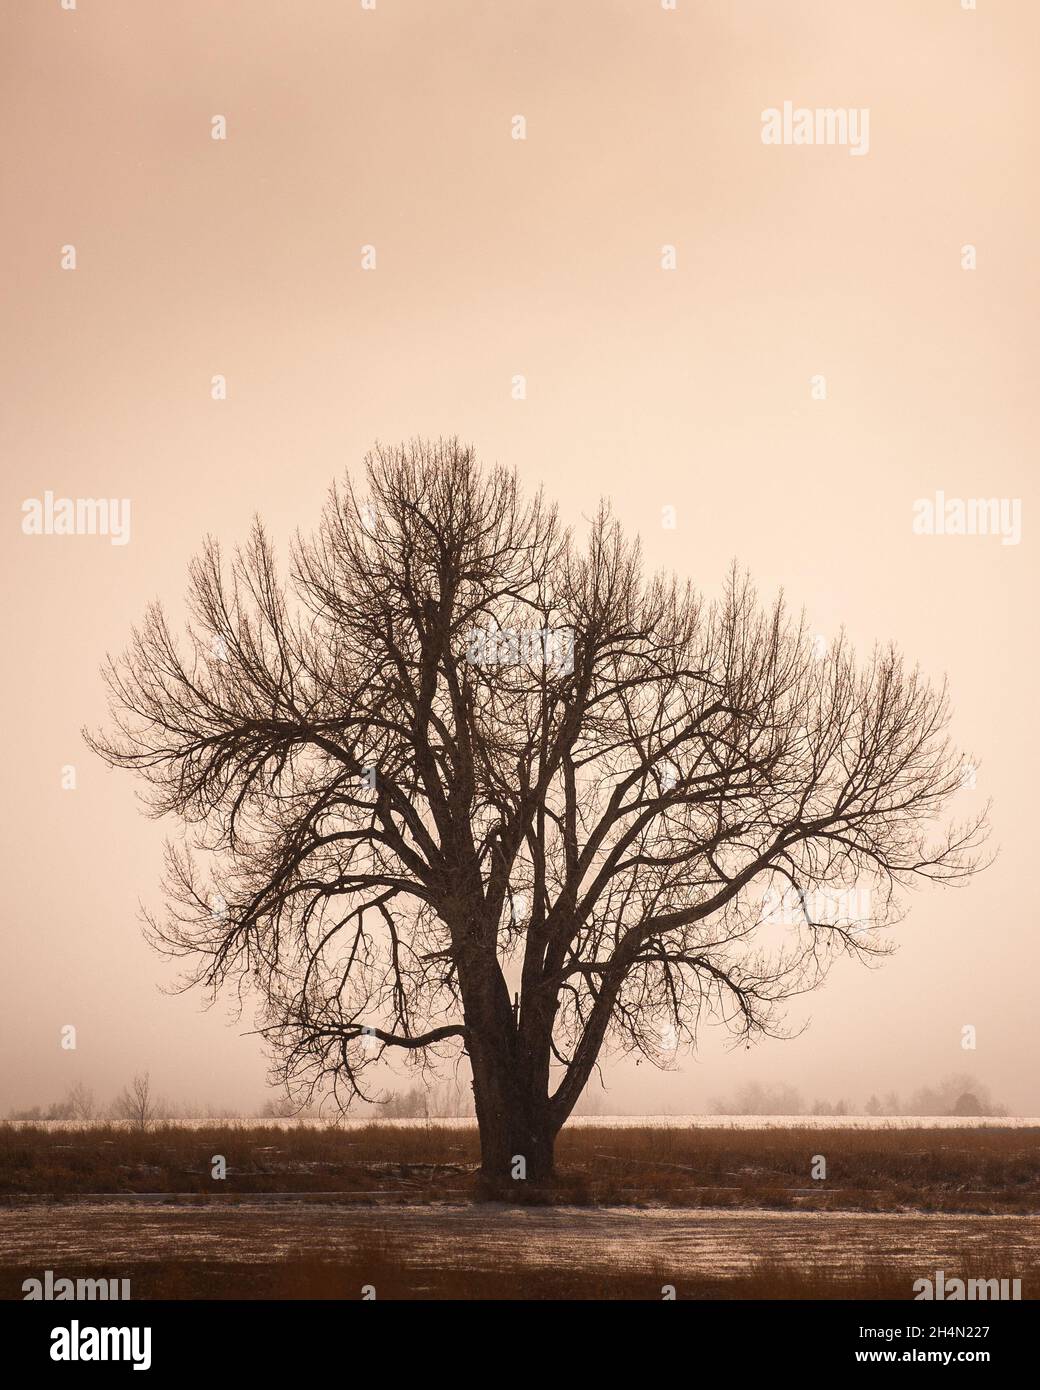 A sepia toned image of a tree in a field Stock Photo